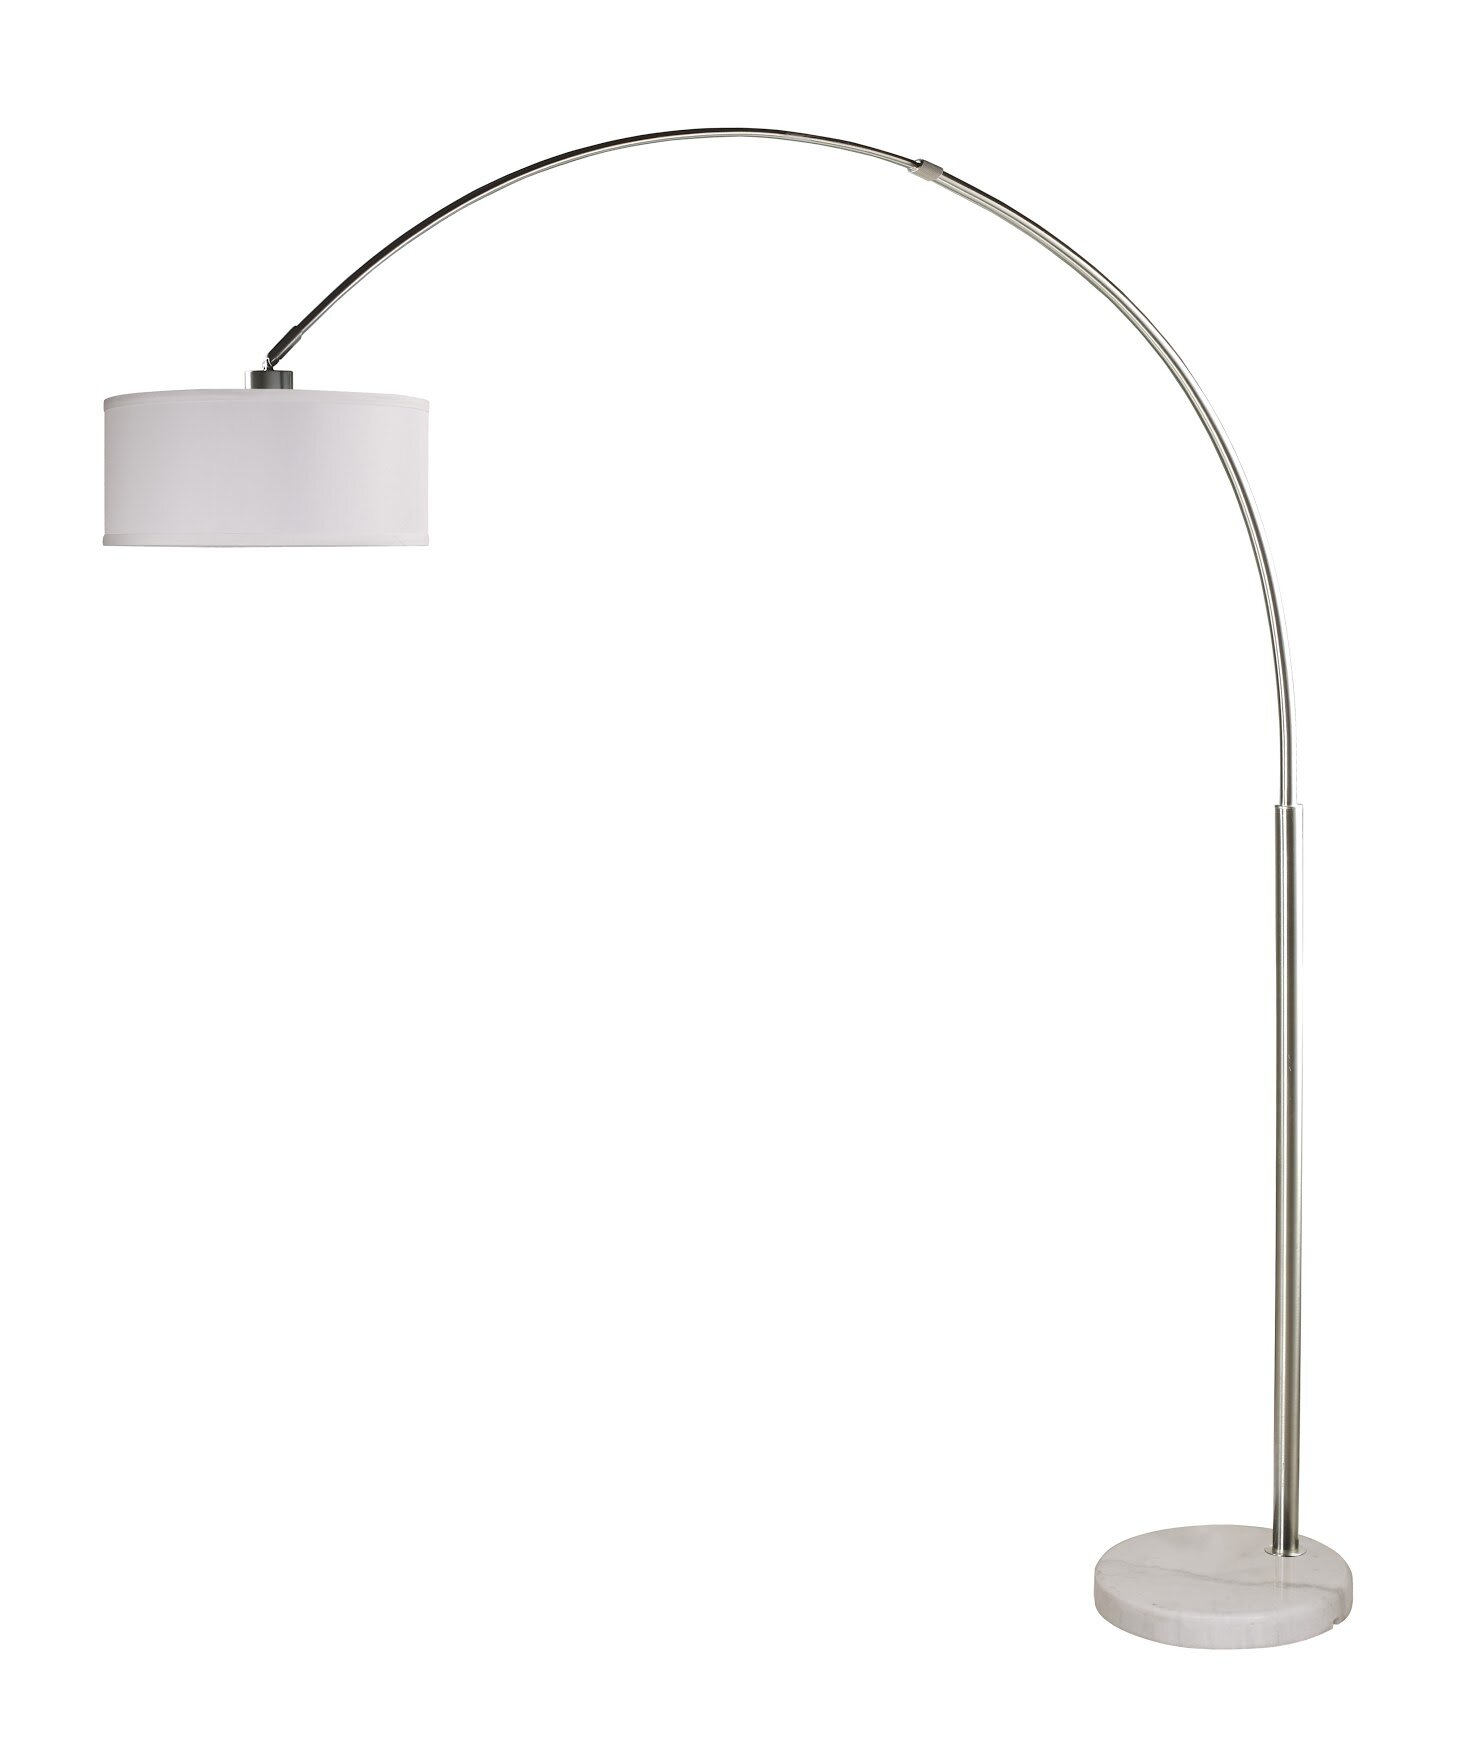 Langley Street Maui 81 Arched Floor Lamp pertaining to measurements 1462 X 1744